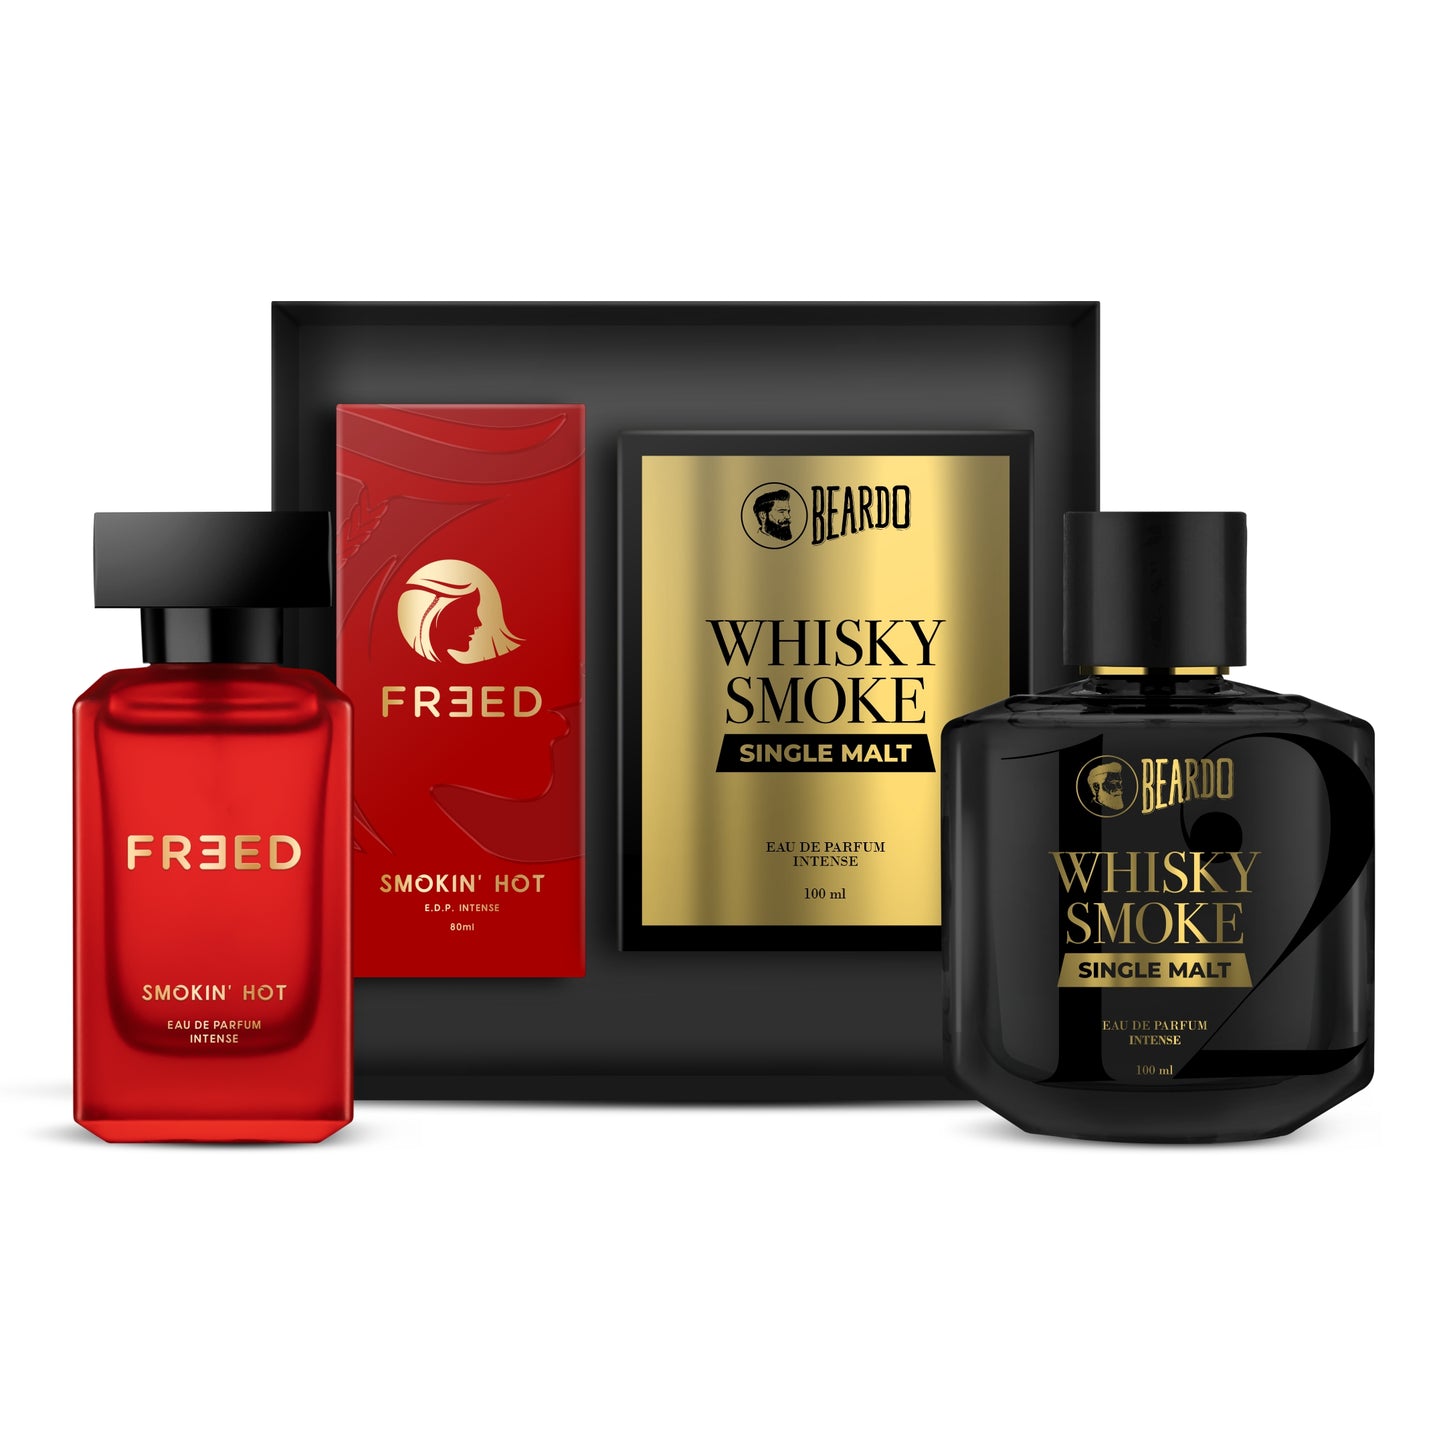 Beardo & Freed Spicy Perfume Gift Set (For Him & Her)